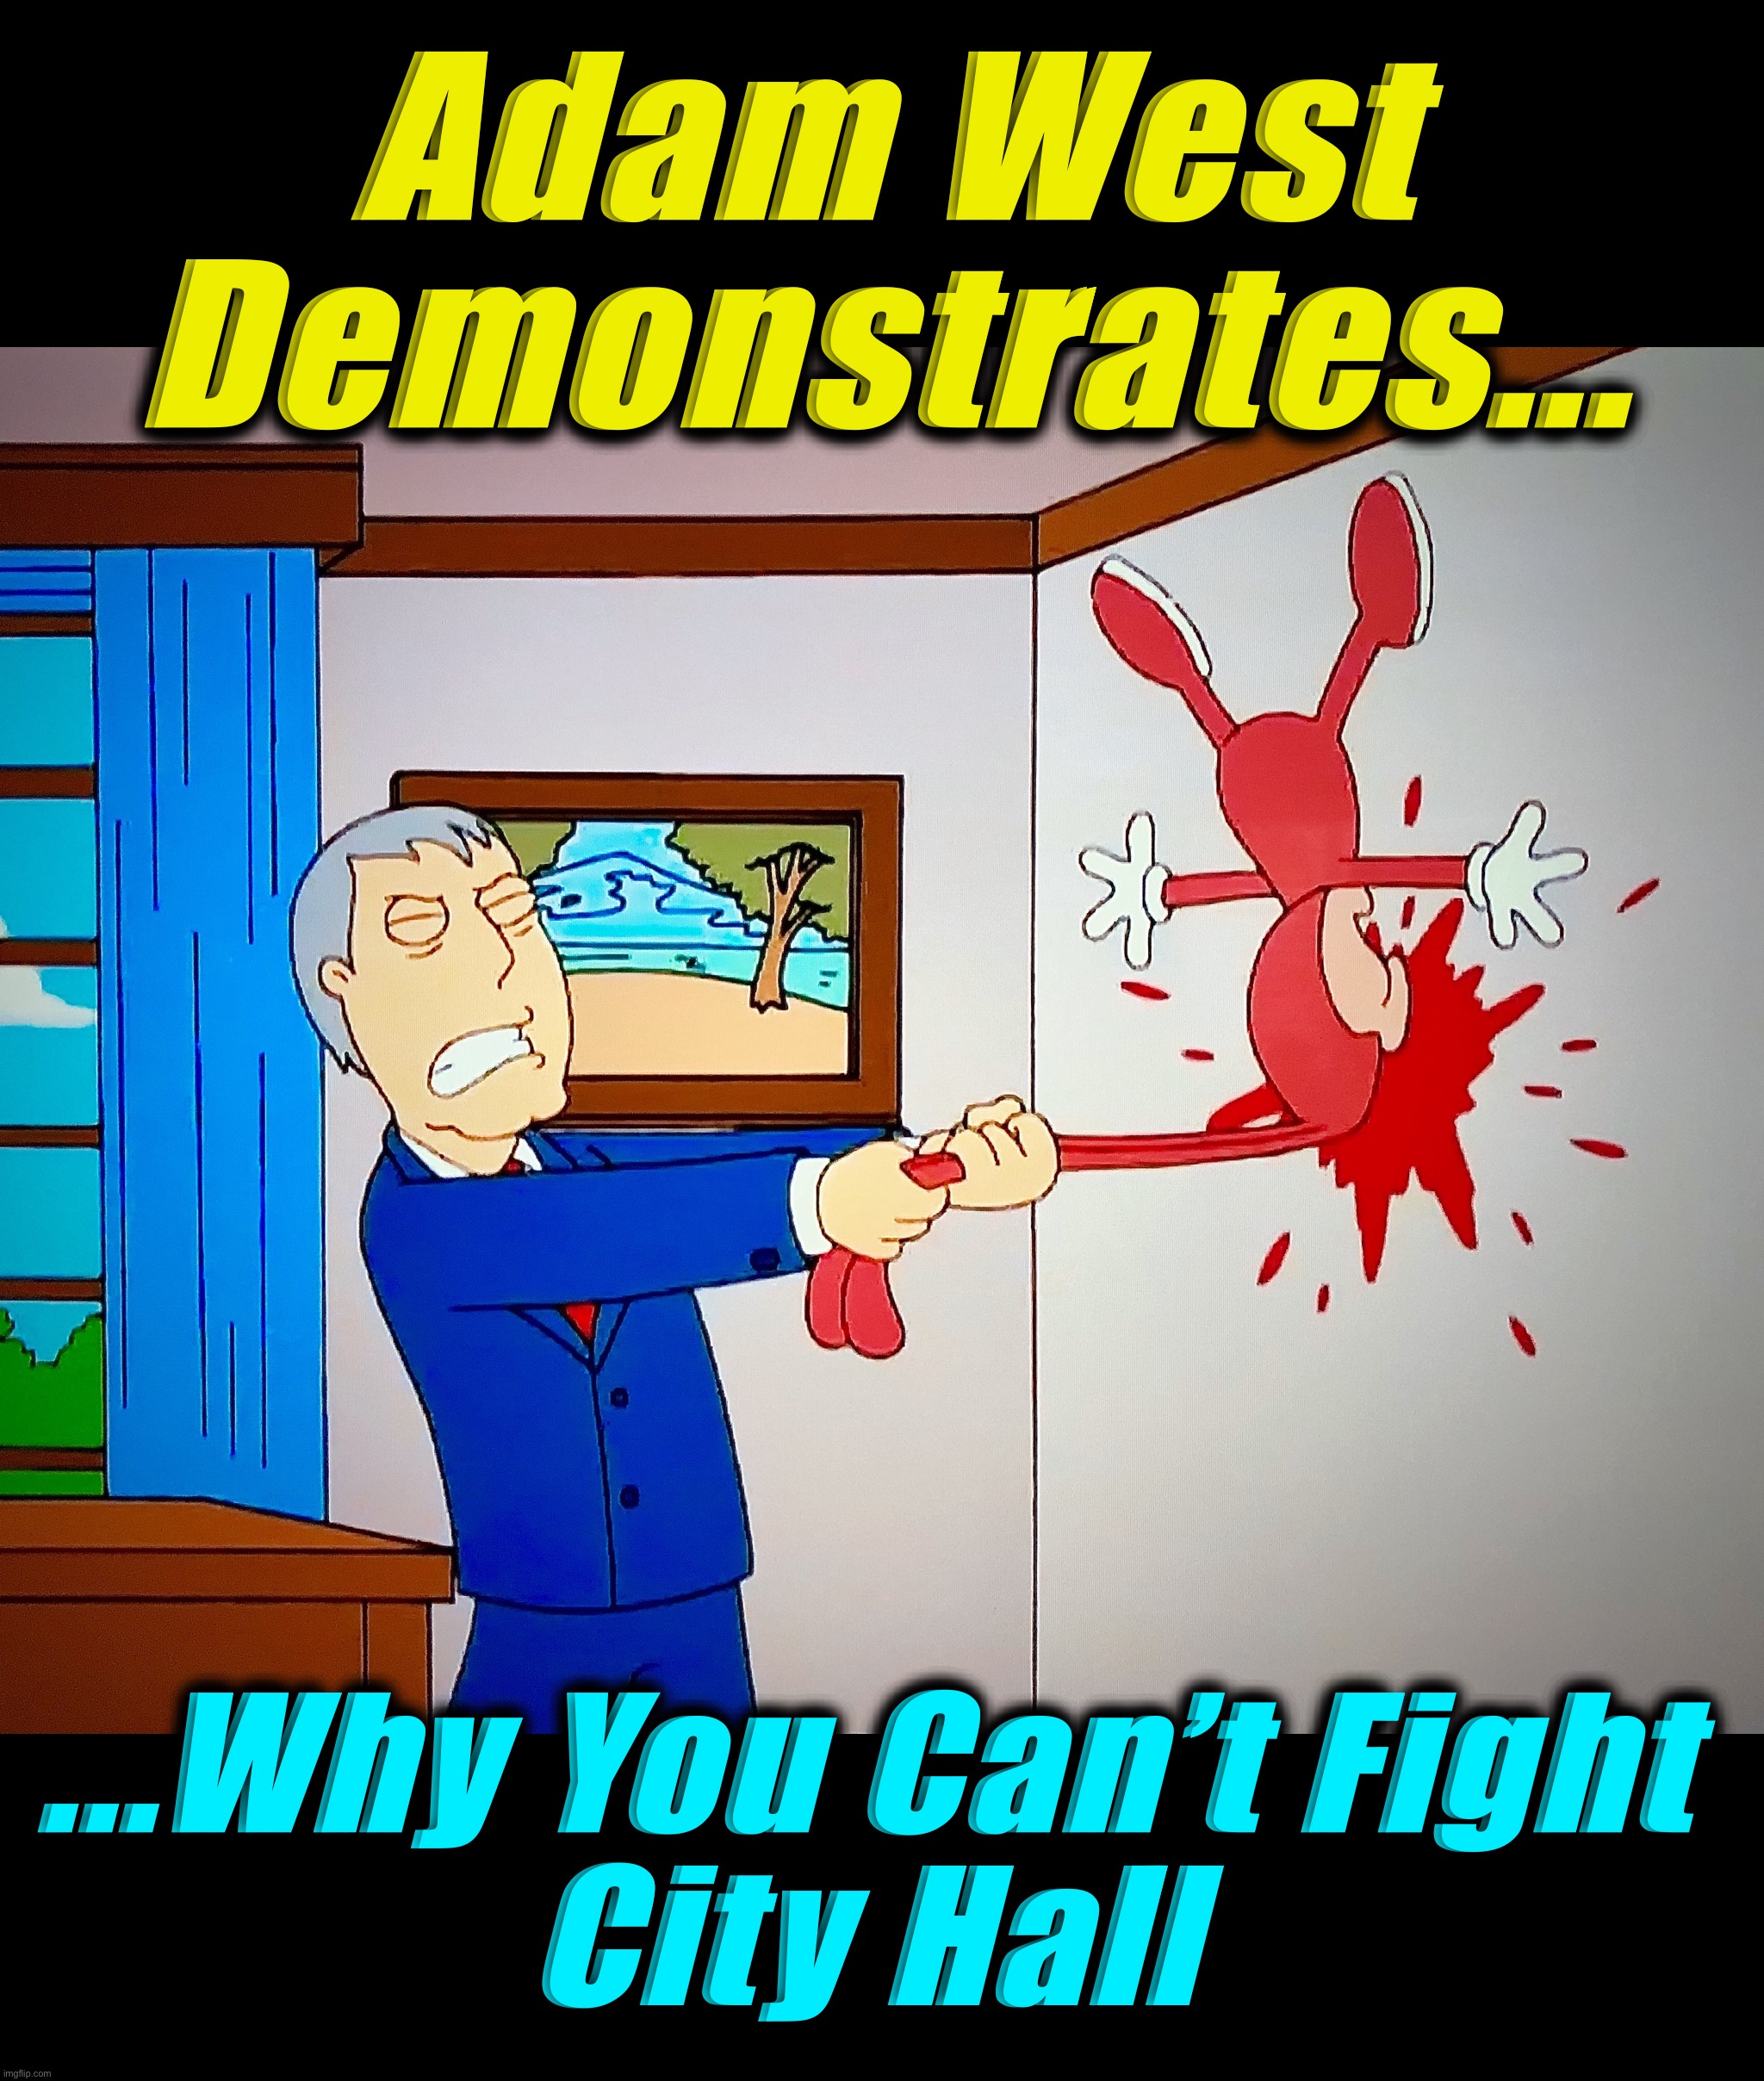 The First Rule of Fight Club | Adam West
Demonstrates... ...Why You Can’t Fight
City Hall | image tagged in mayor west kills the noid,memes,adam west,politicians,fatality,mayor | made w/ Imgflip meme maker